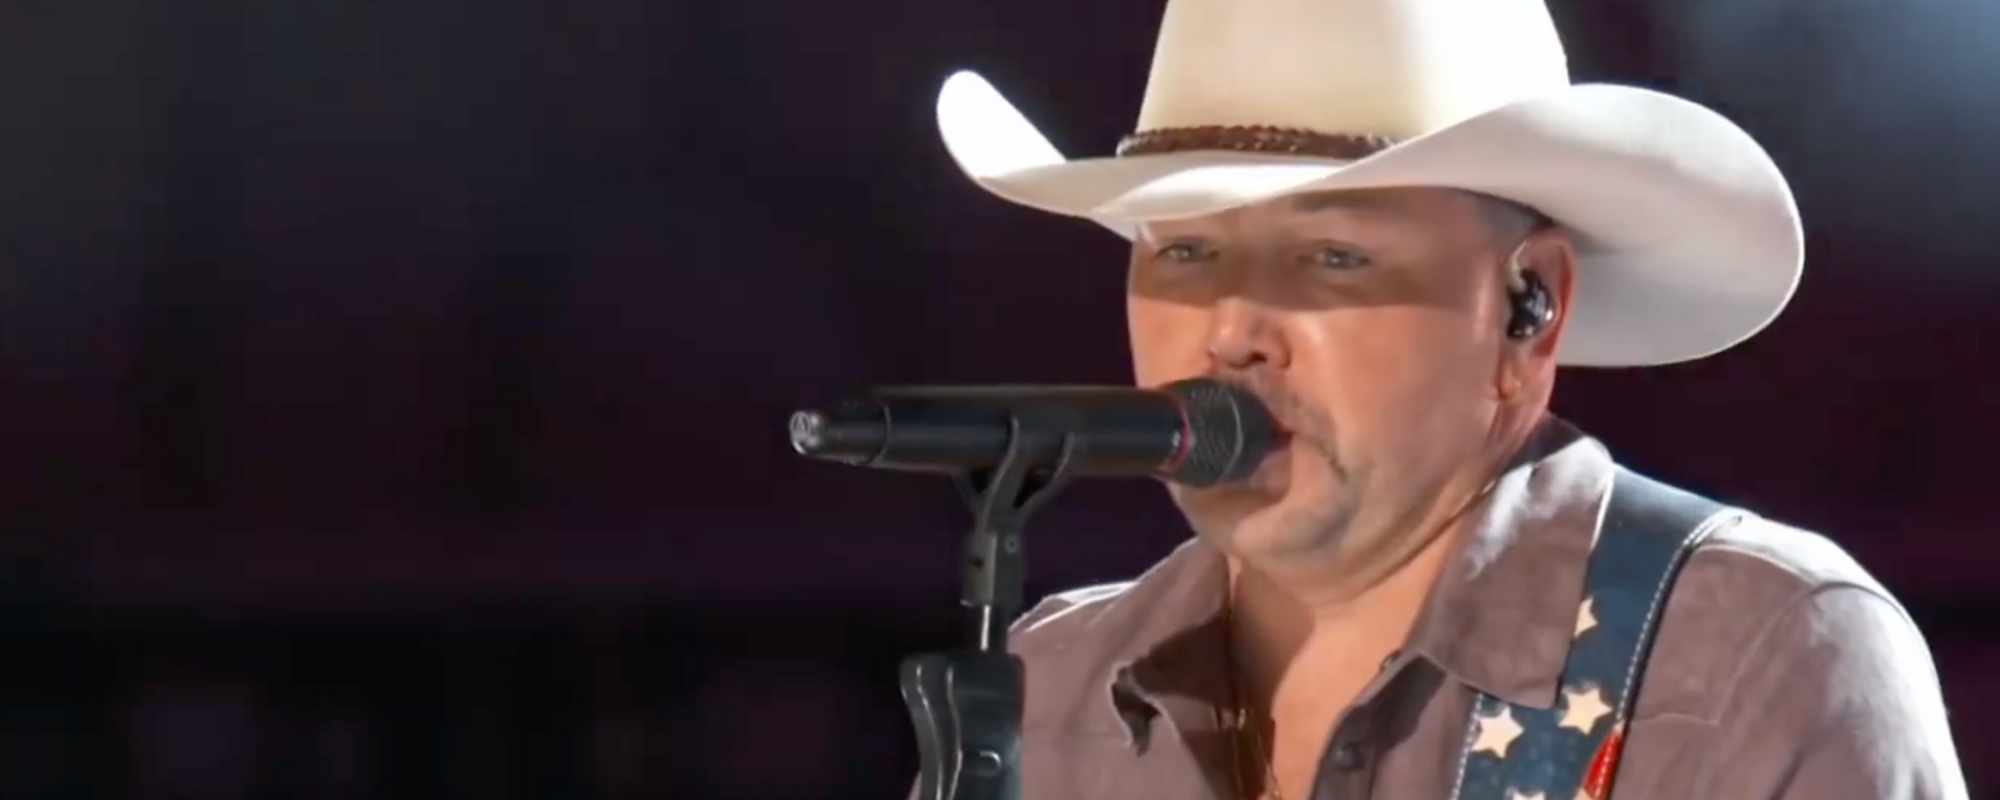 Jason Aldean Performs “Let Your Boys Be Country” at the CMT Music Awards Following Ban